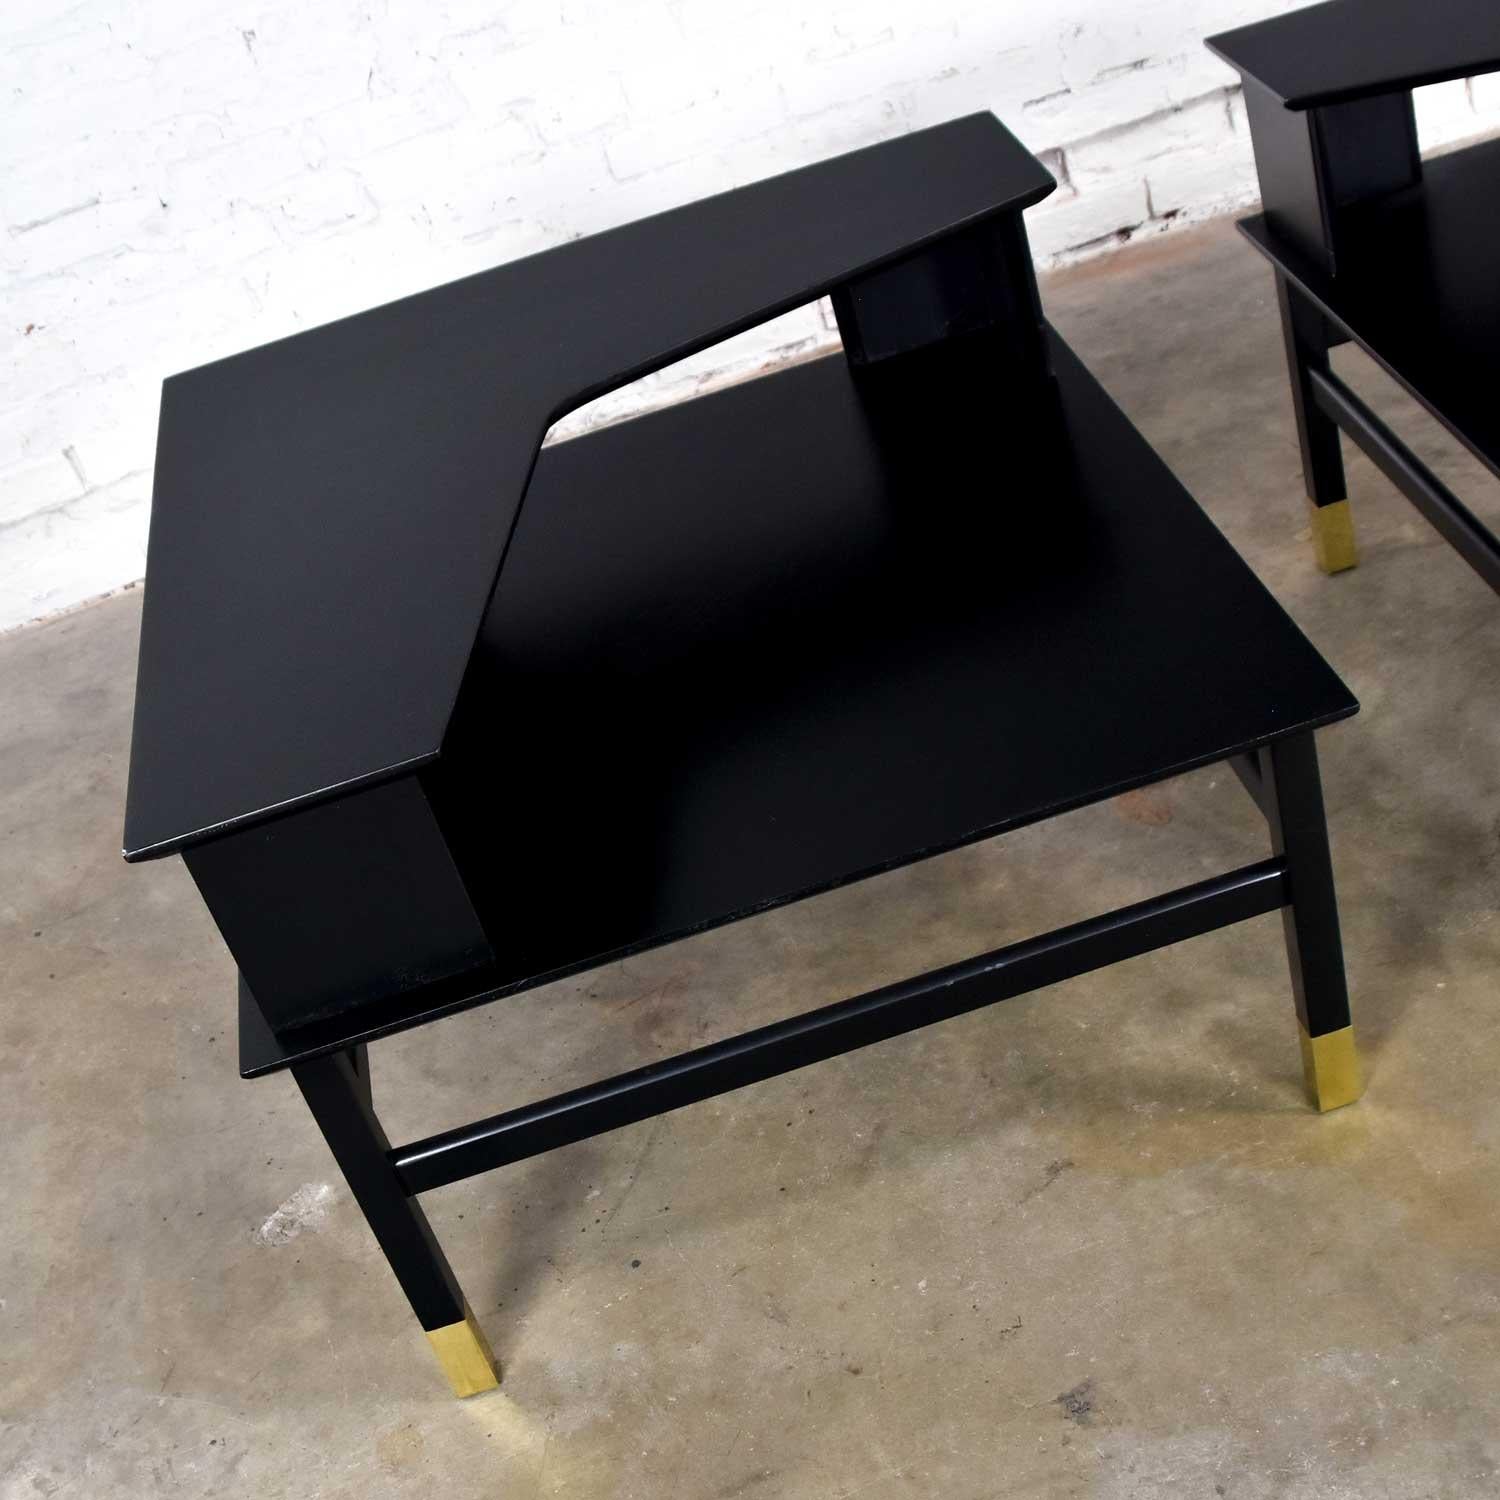 2 MCM Founders Corner Step Tables Black Brass Sabots Coronado Grp Luther Draper  In Good Condition For Sale In Topeka, KS